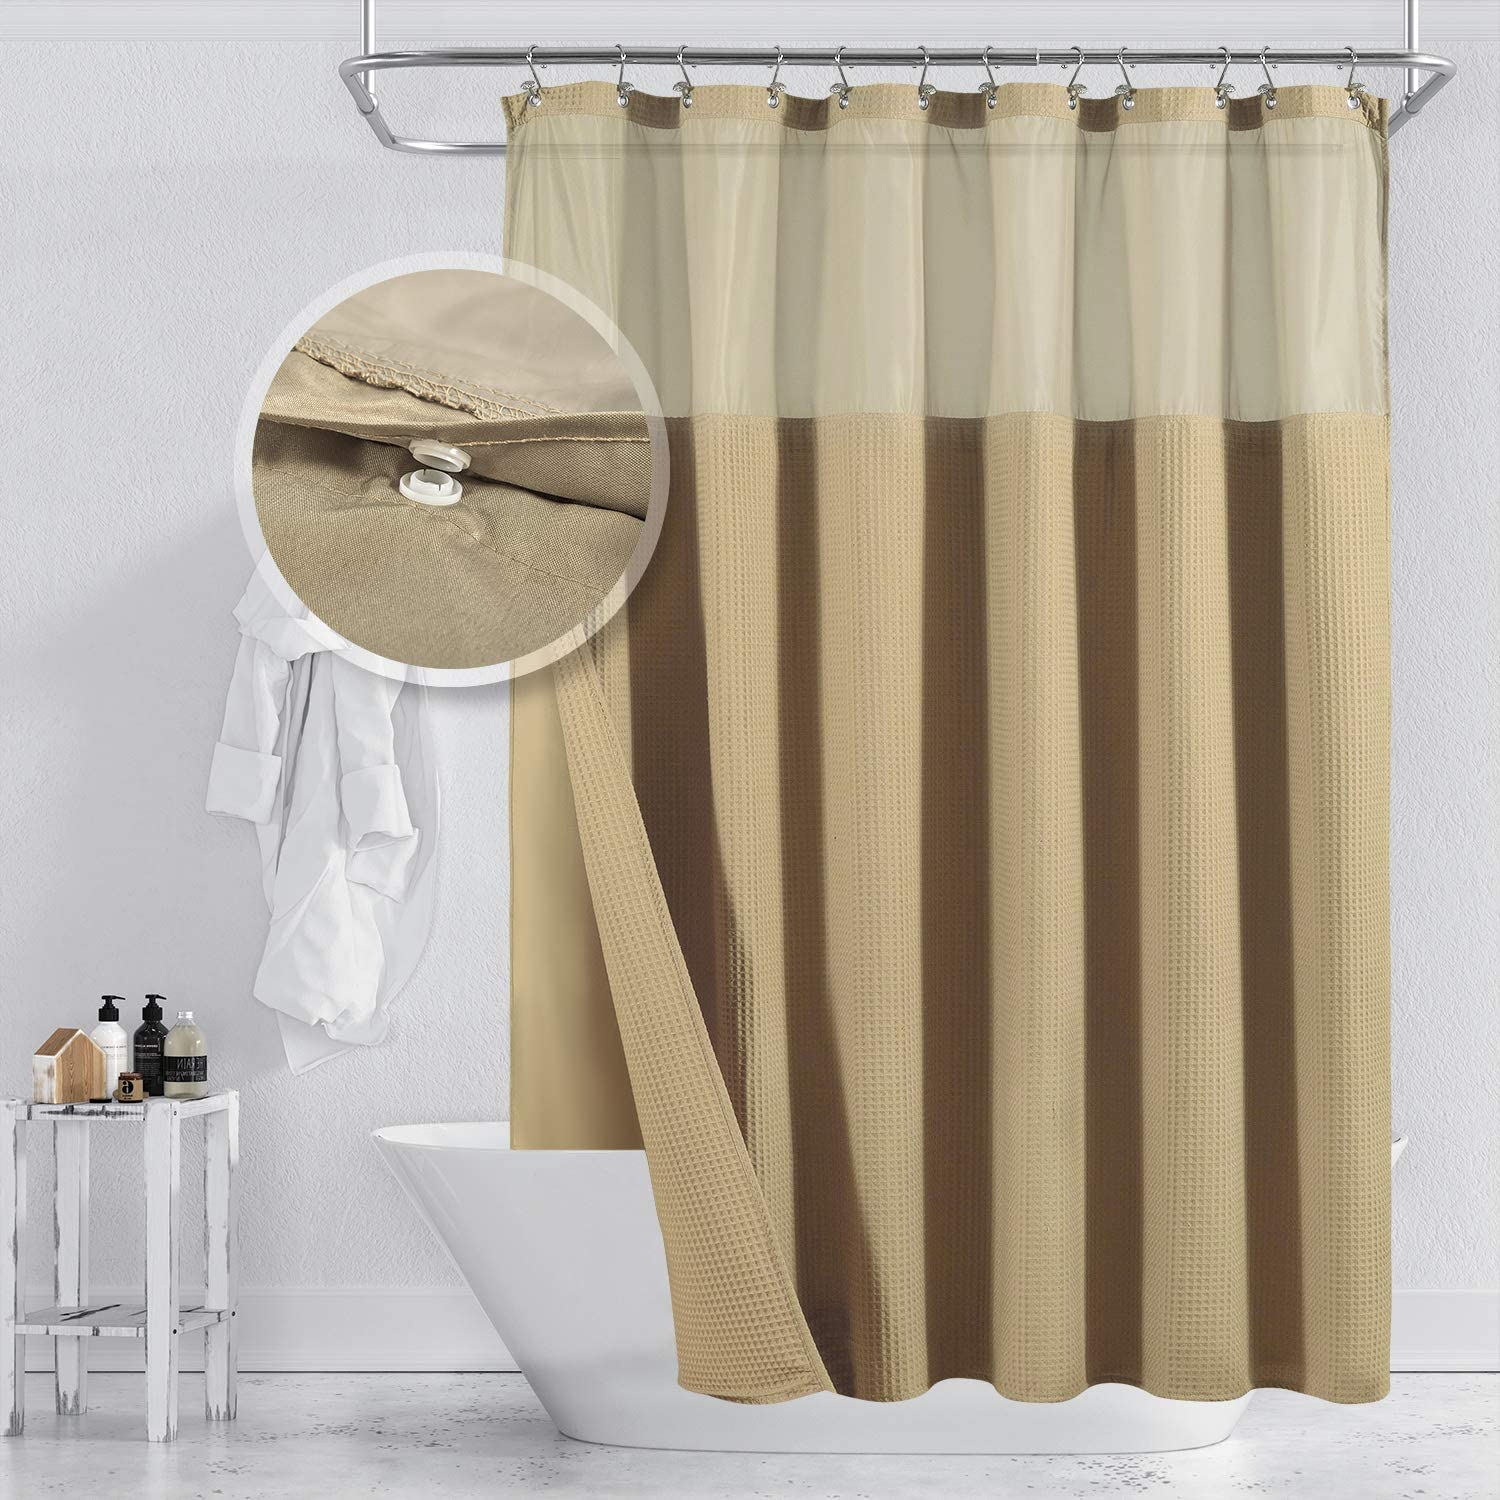 M Barossa Design Hotel Style Shower Curtain with Snap-in Fabric Liner 75" Long 